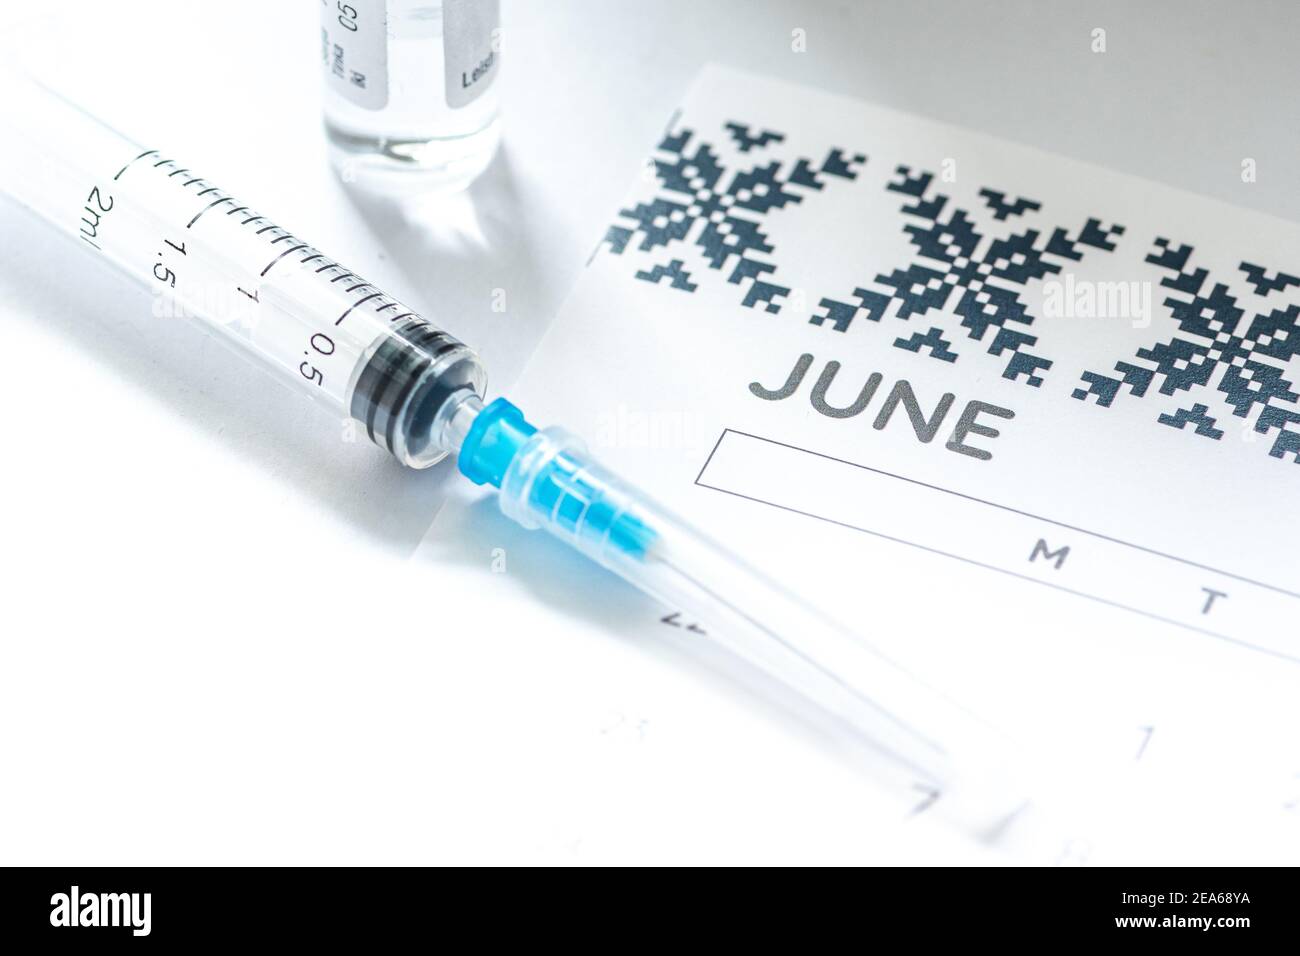 Syringe, glass vial or phial and calendar with month of June on a white table ready to be used. Covid or Coronavirus vaccine background, close up Stock Photo